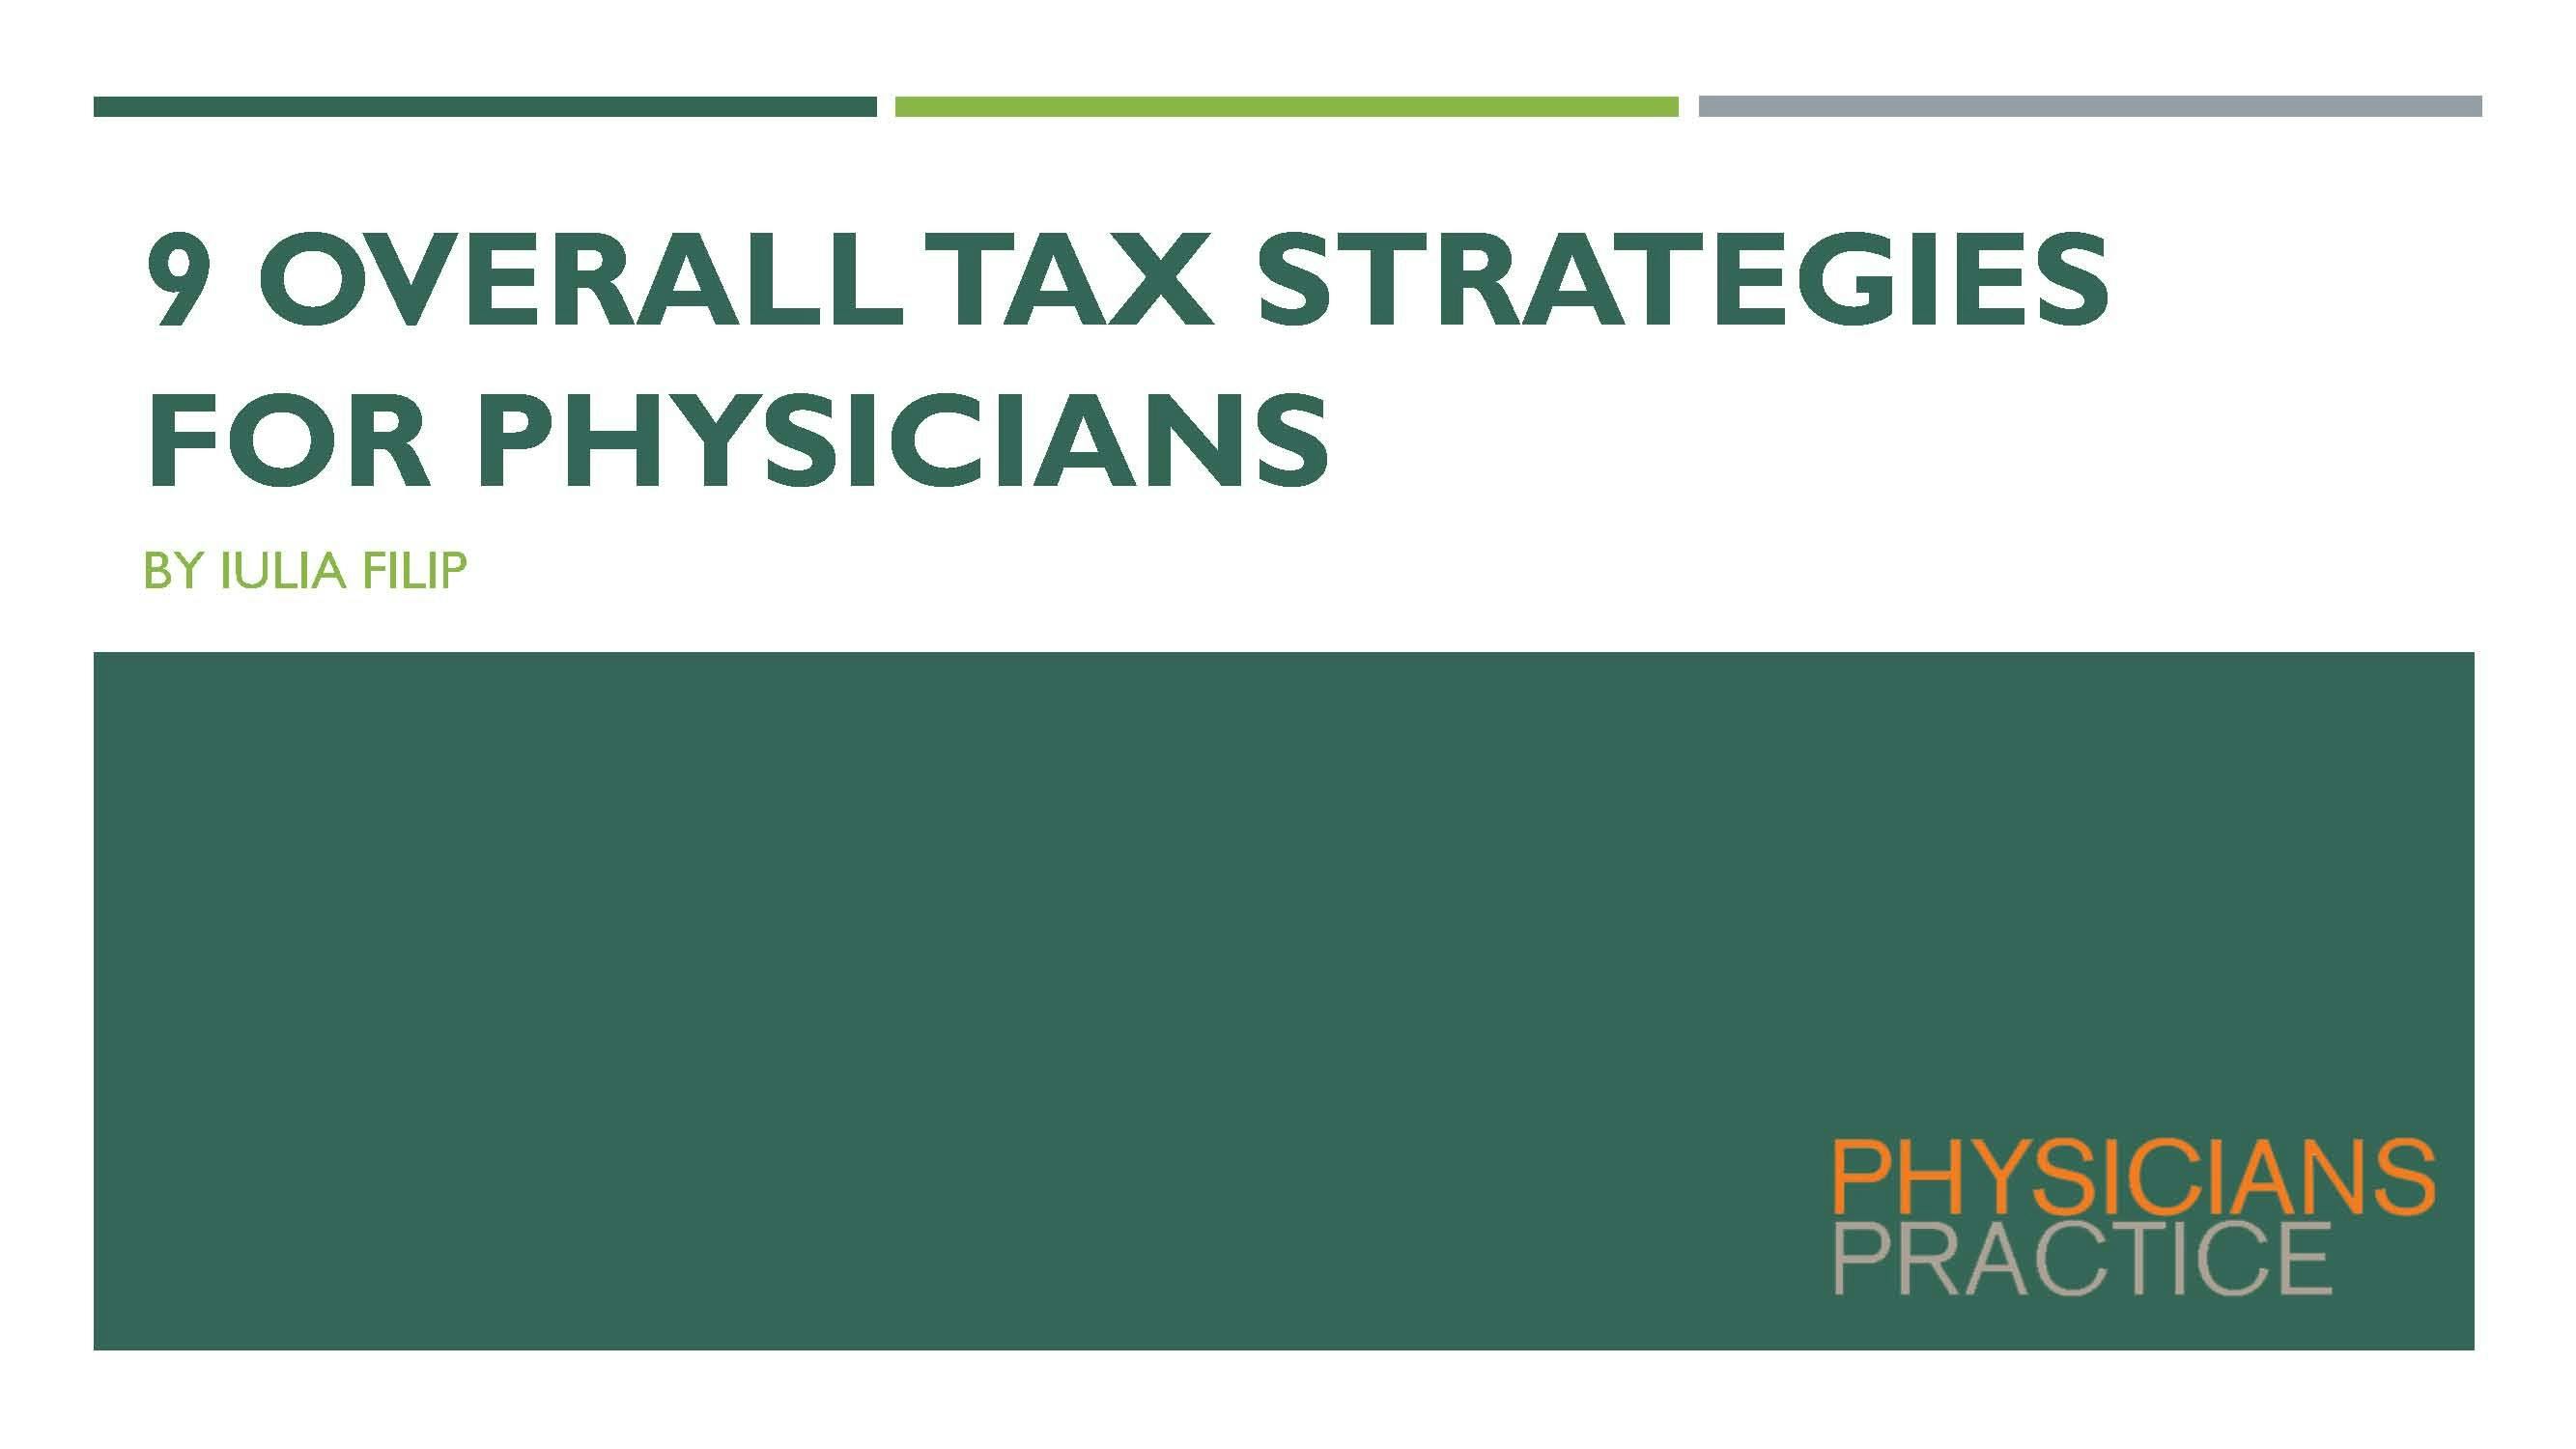 9 Overall Tax Strategies for Physicians